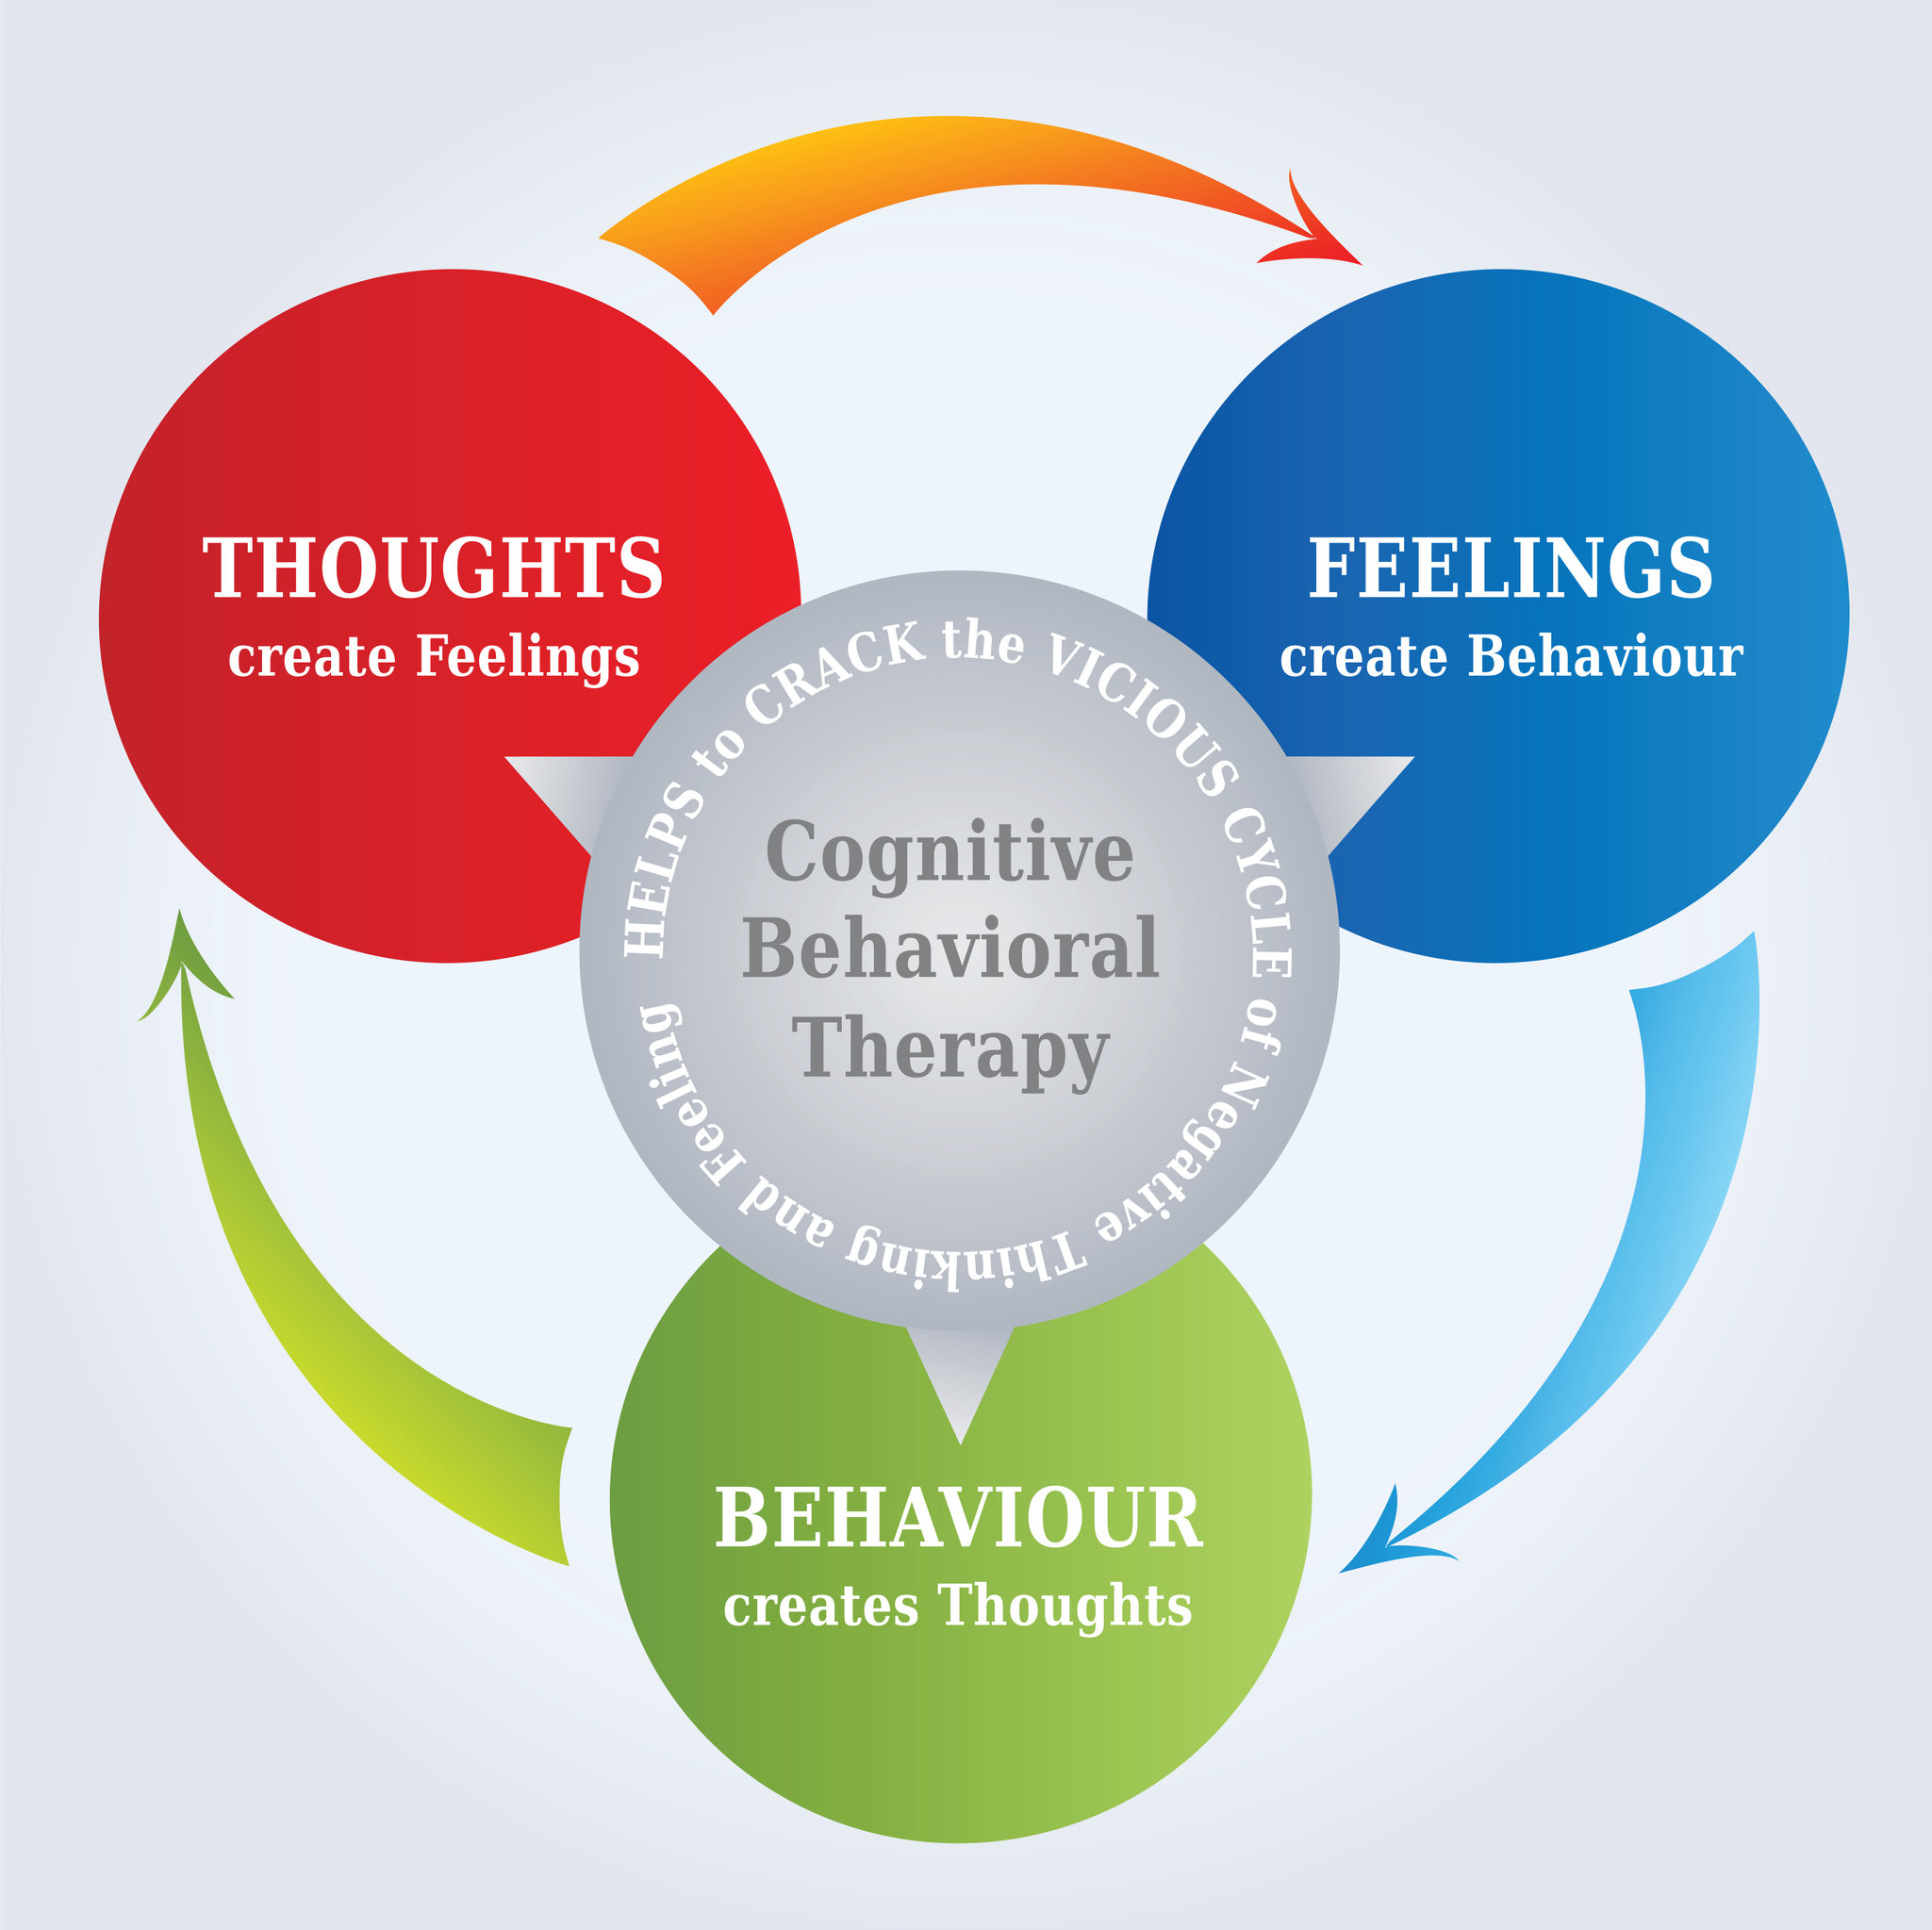 CBT Cycle Diagram - Thoughts create Reality - Psychotherapy